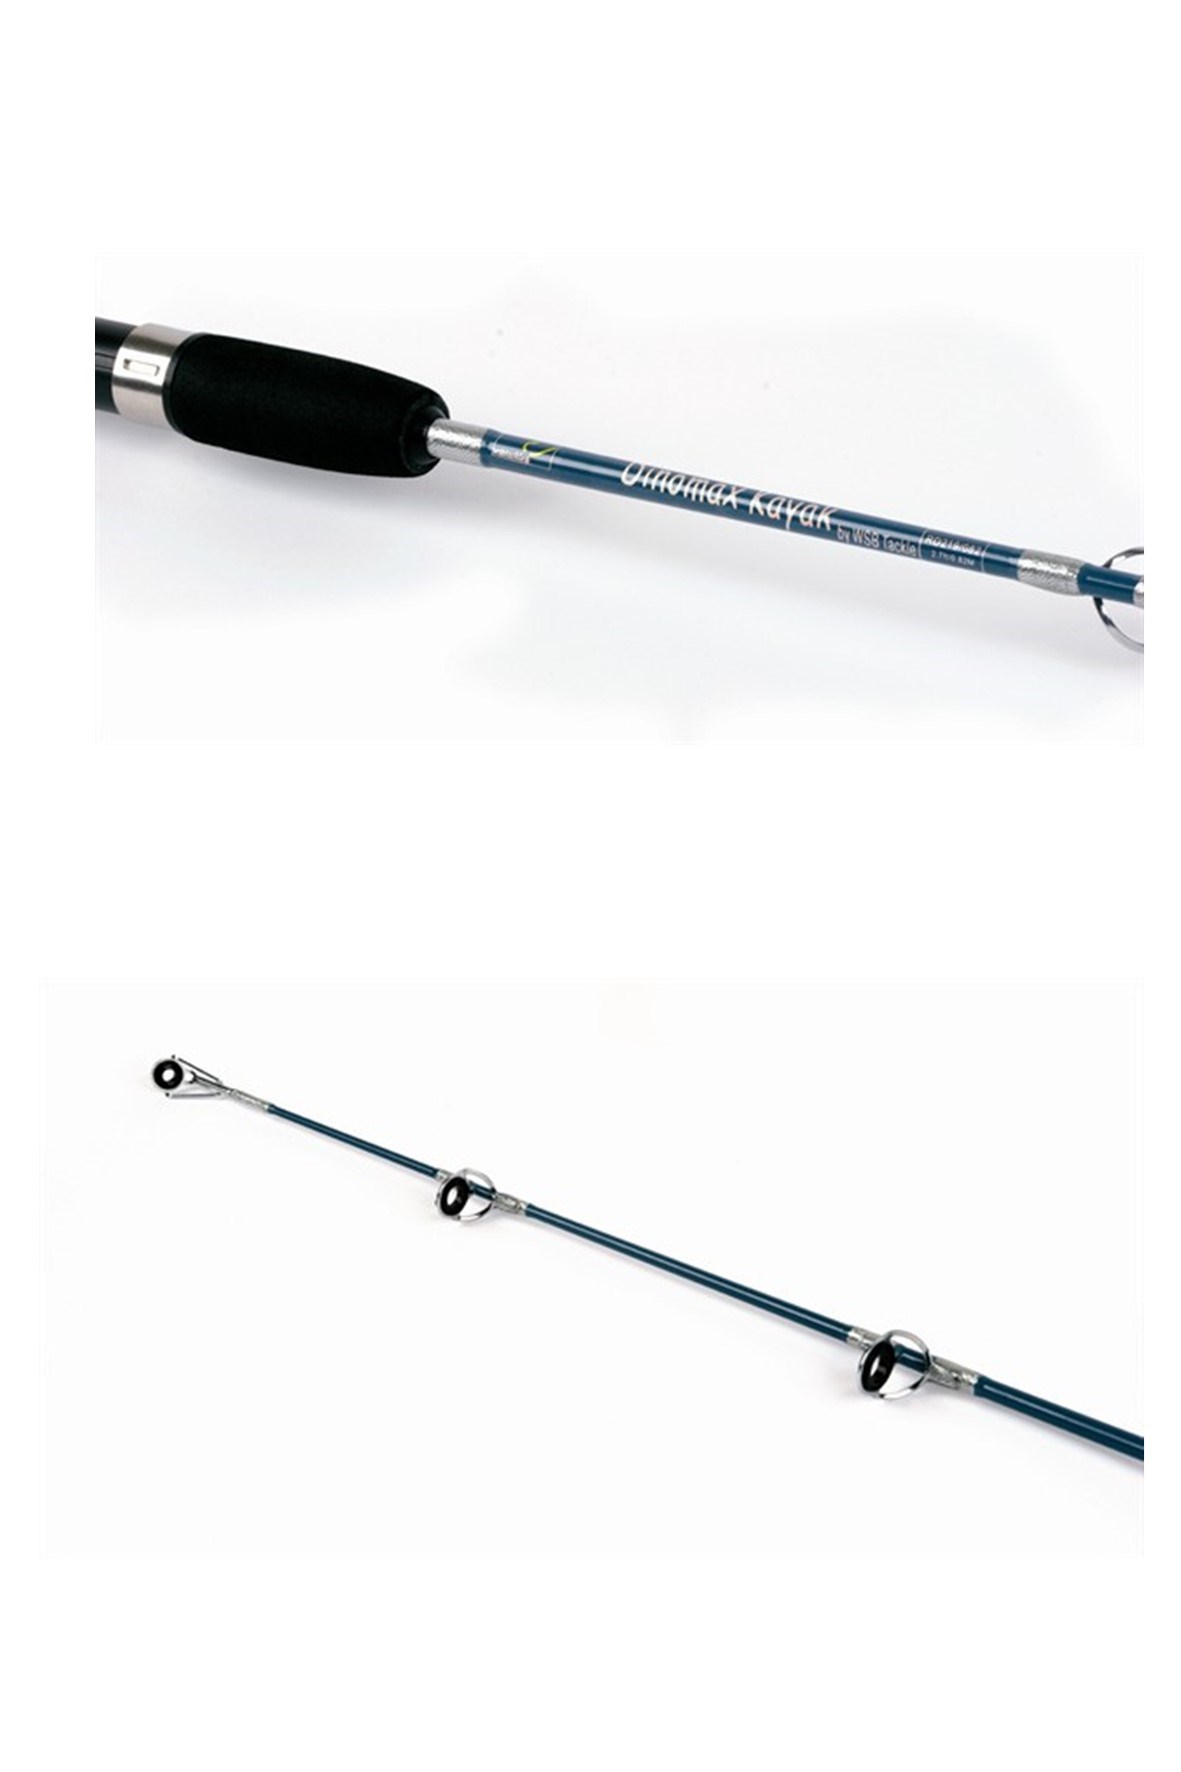 Ignition Fishing Rod and Reel Combo Set